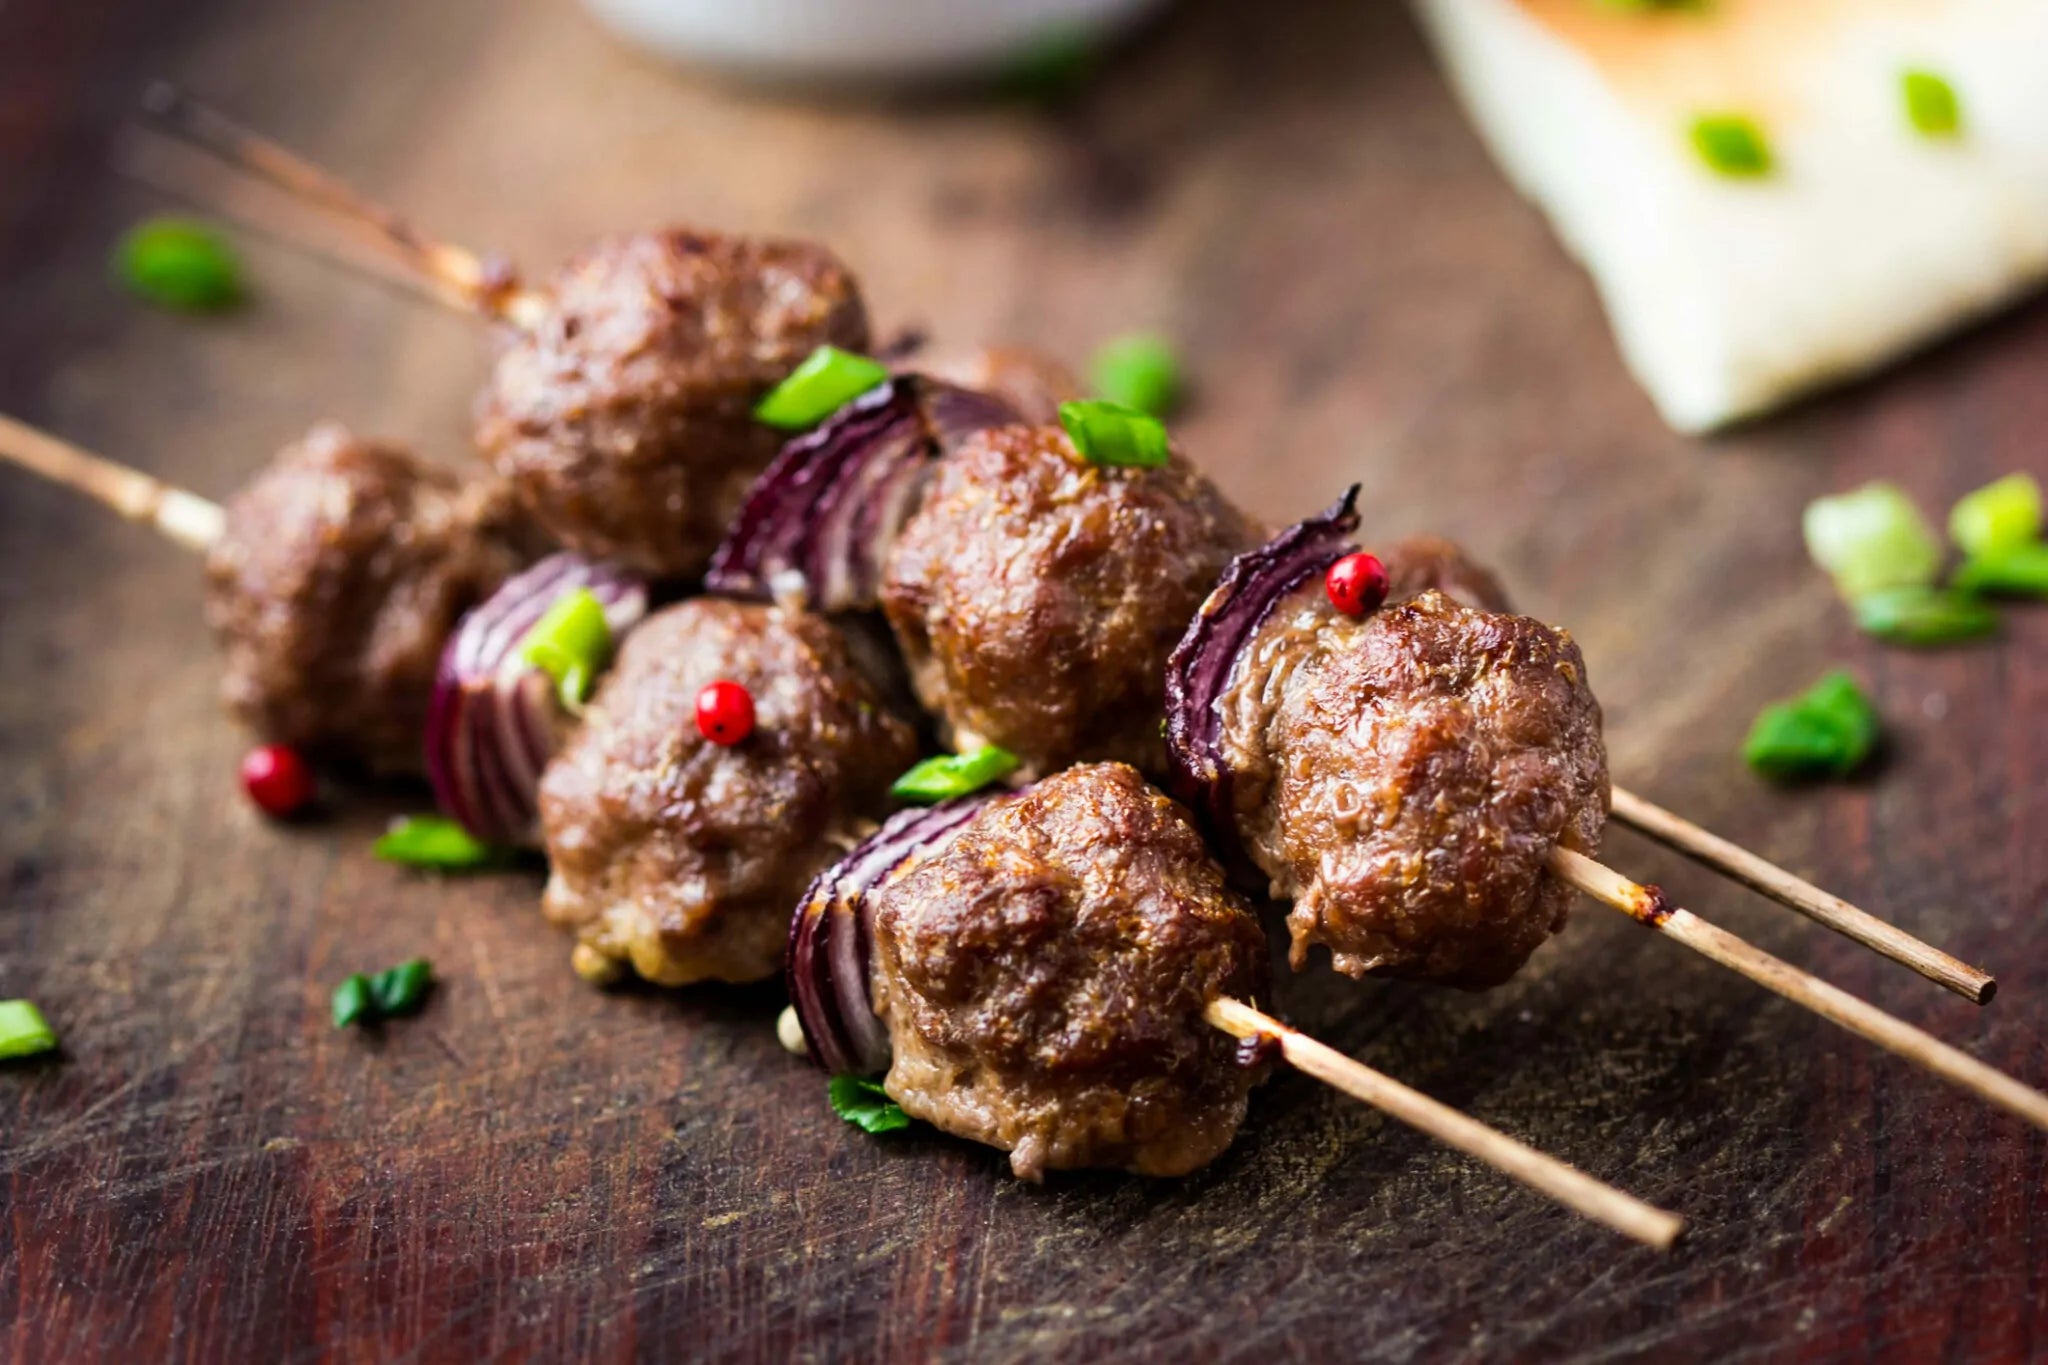 Skewers with Meatballs